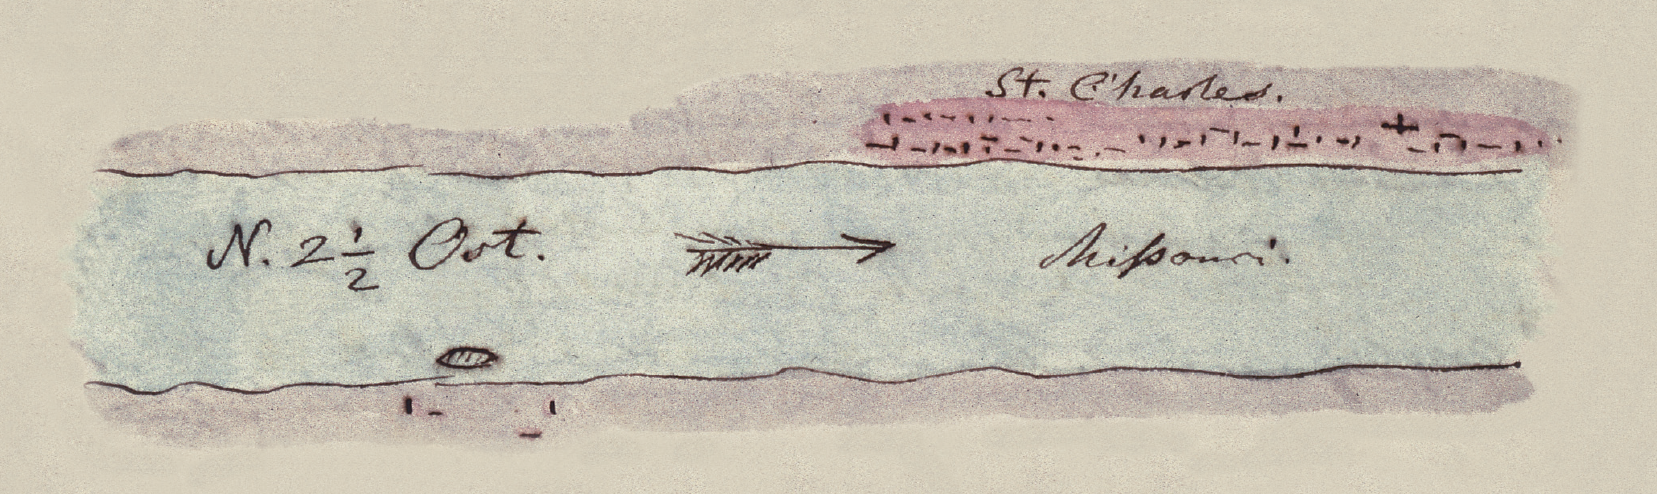 Figure 7.12. Map showing (in pink wash) the extent of the town of St. Charles on the bank of the Missouri. The inscription “N. 2 1/2 Ost.” is Maximilian’s indication that the direction of the river flow was 2.5 degrees north of east.